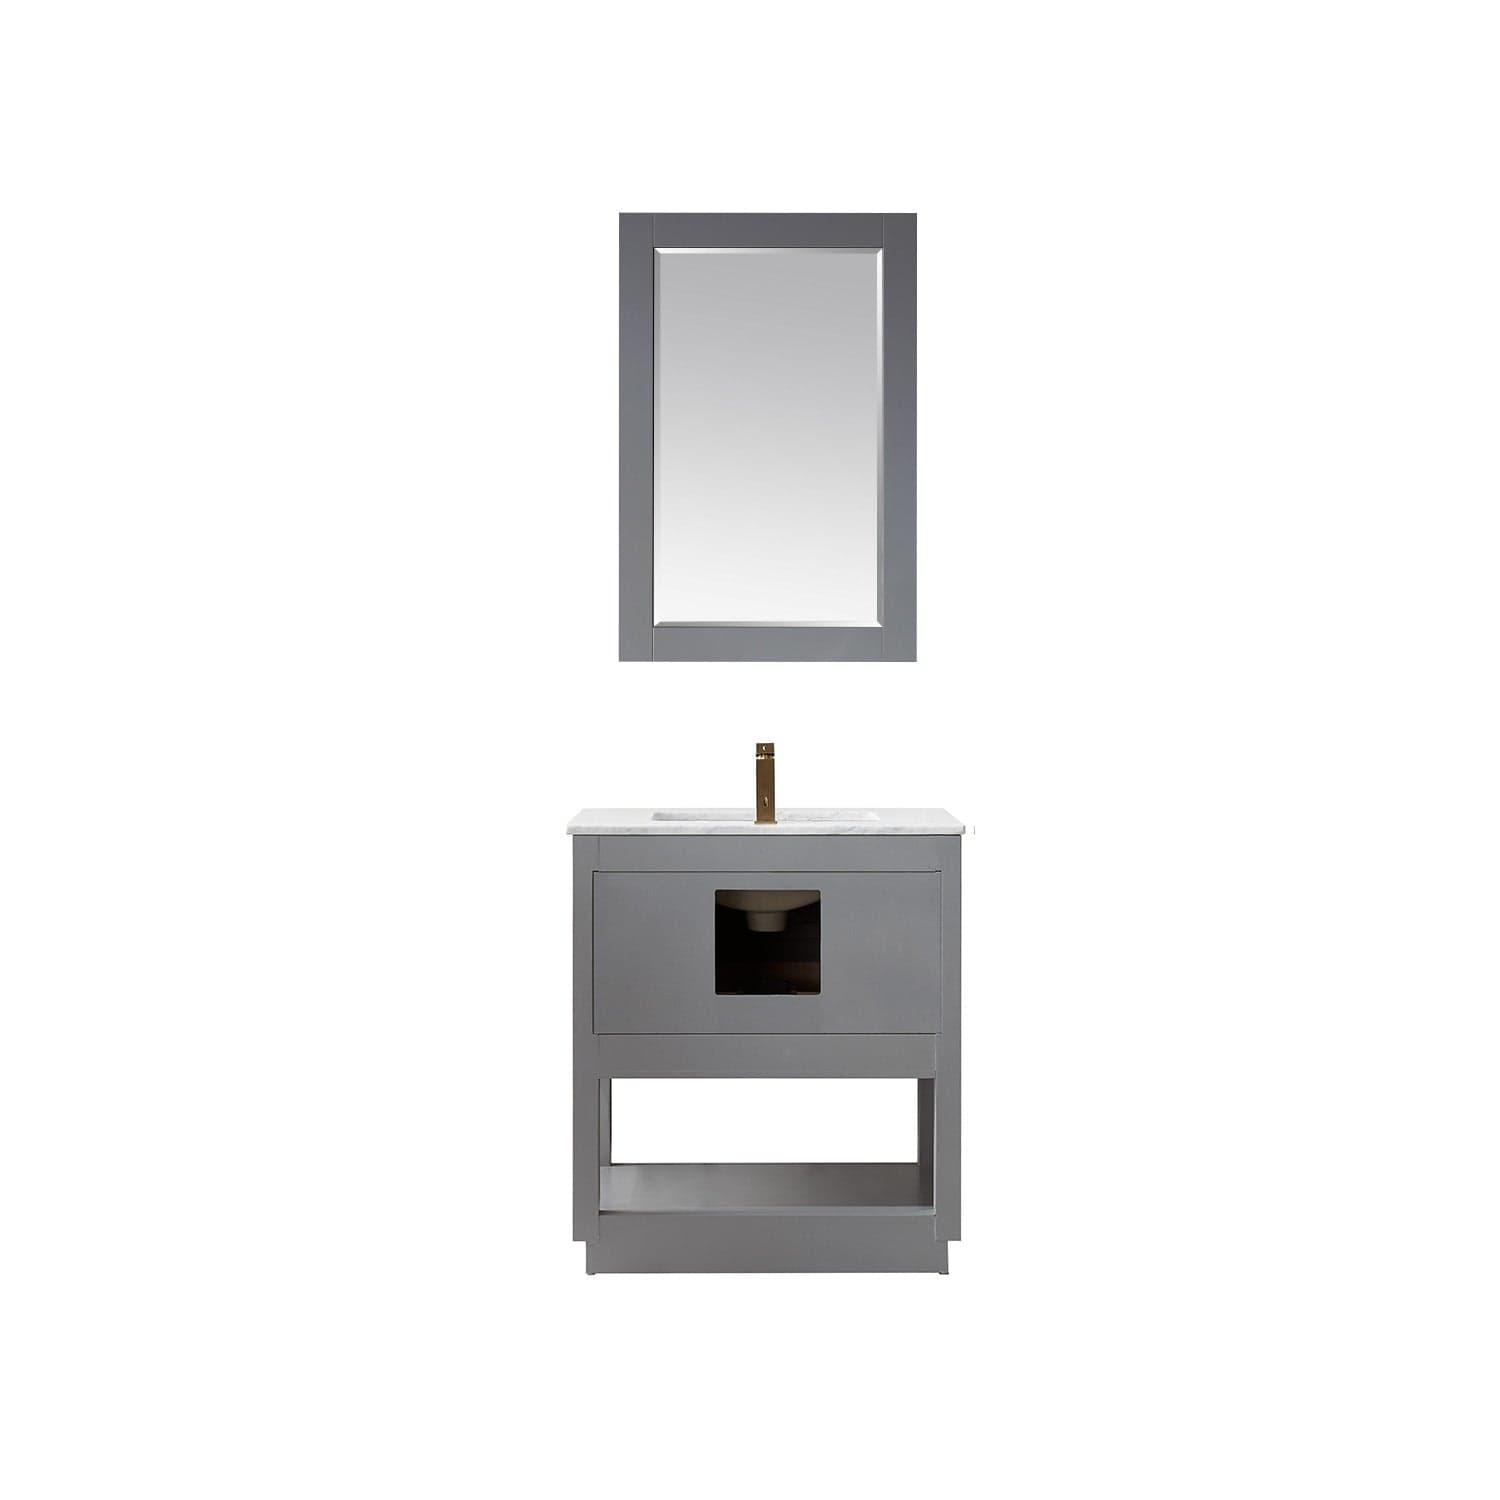 Altair Remi 30" Single Bathroom Vanity Set in Gray and Carrara White Marble Countertop with Mirror 532030-GR-CA - Molaix631112971331Vanity532030-GR-CA